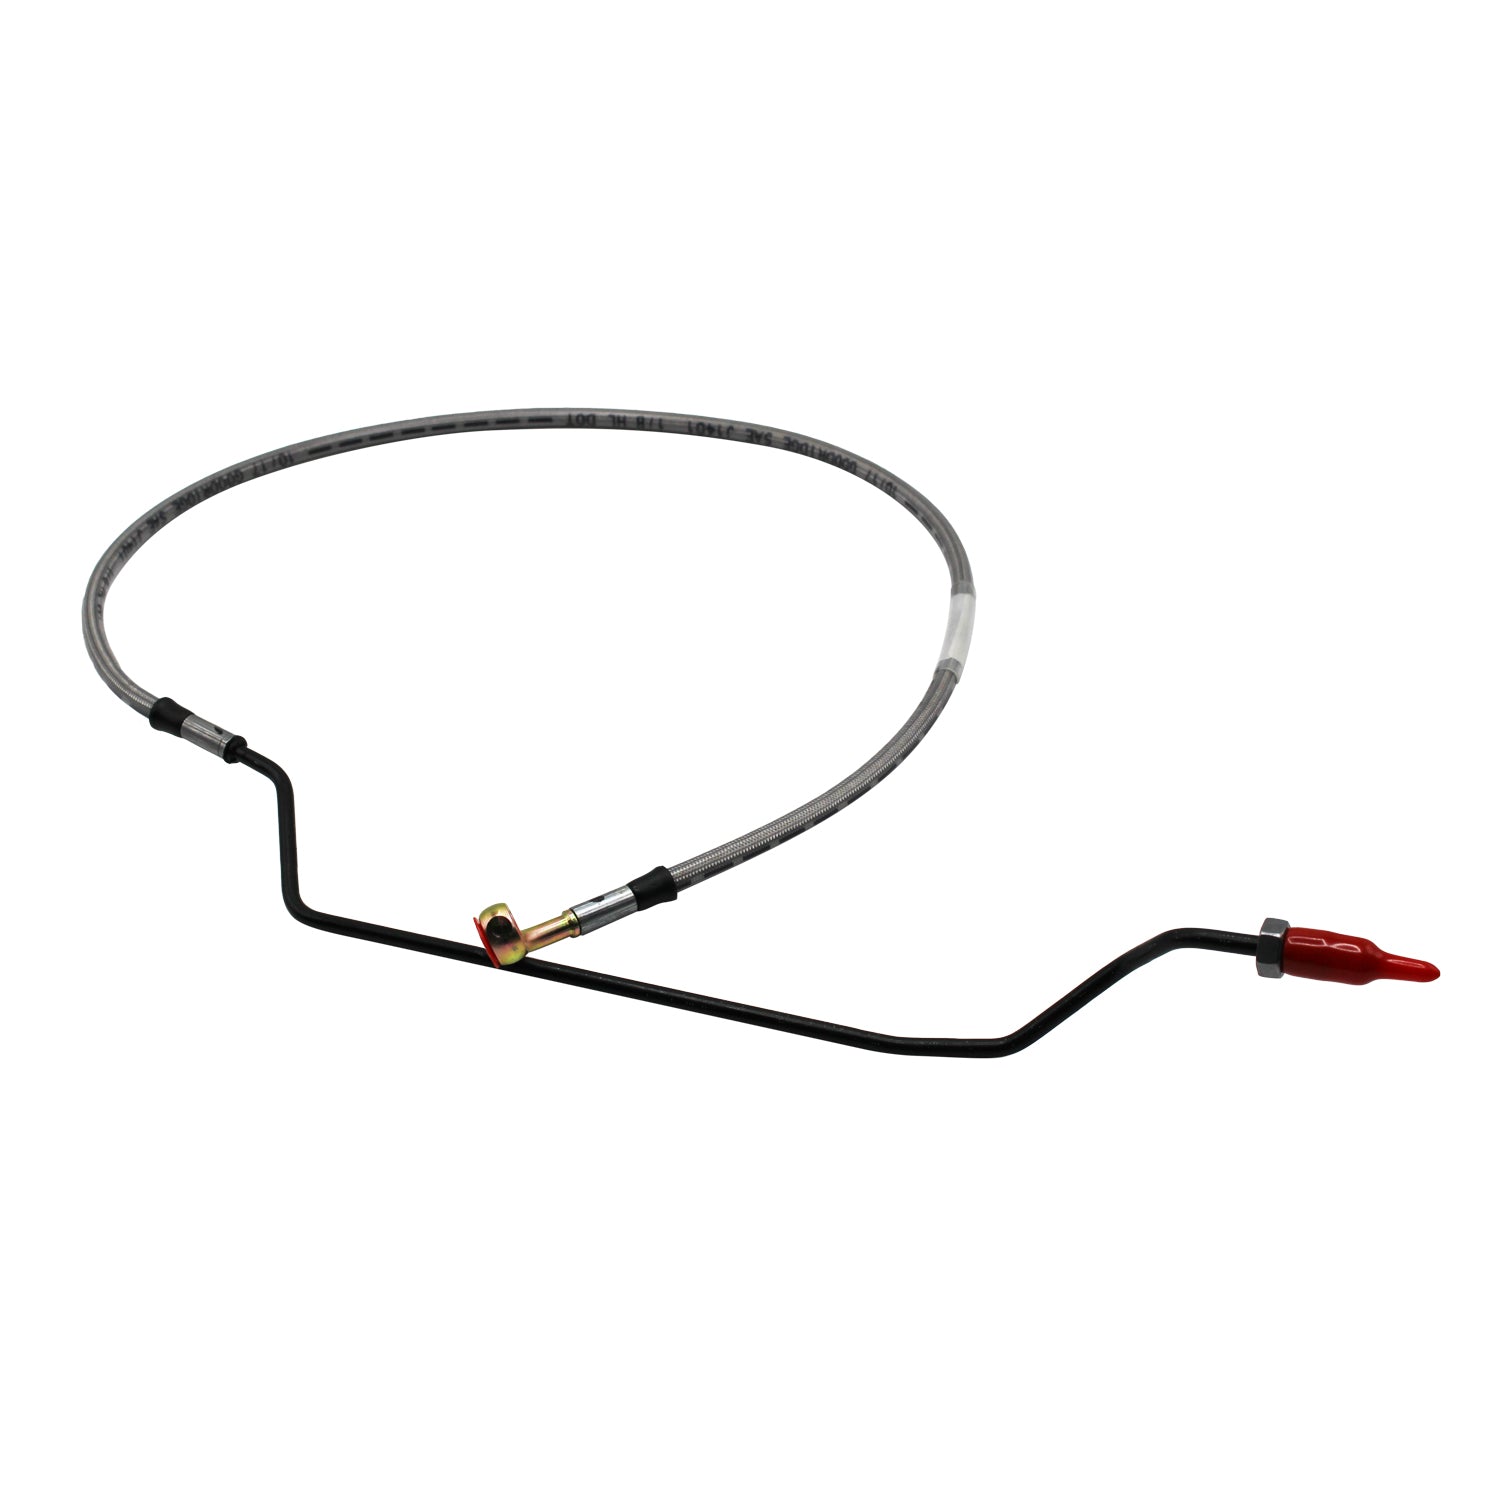 Clutch Cable and ABS Brake Line Kit for Accessory Handlebars